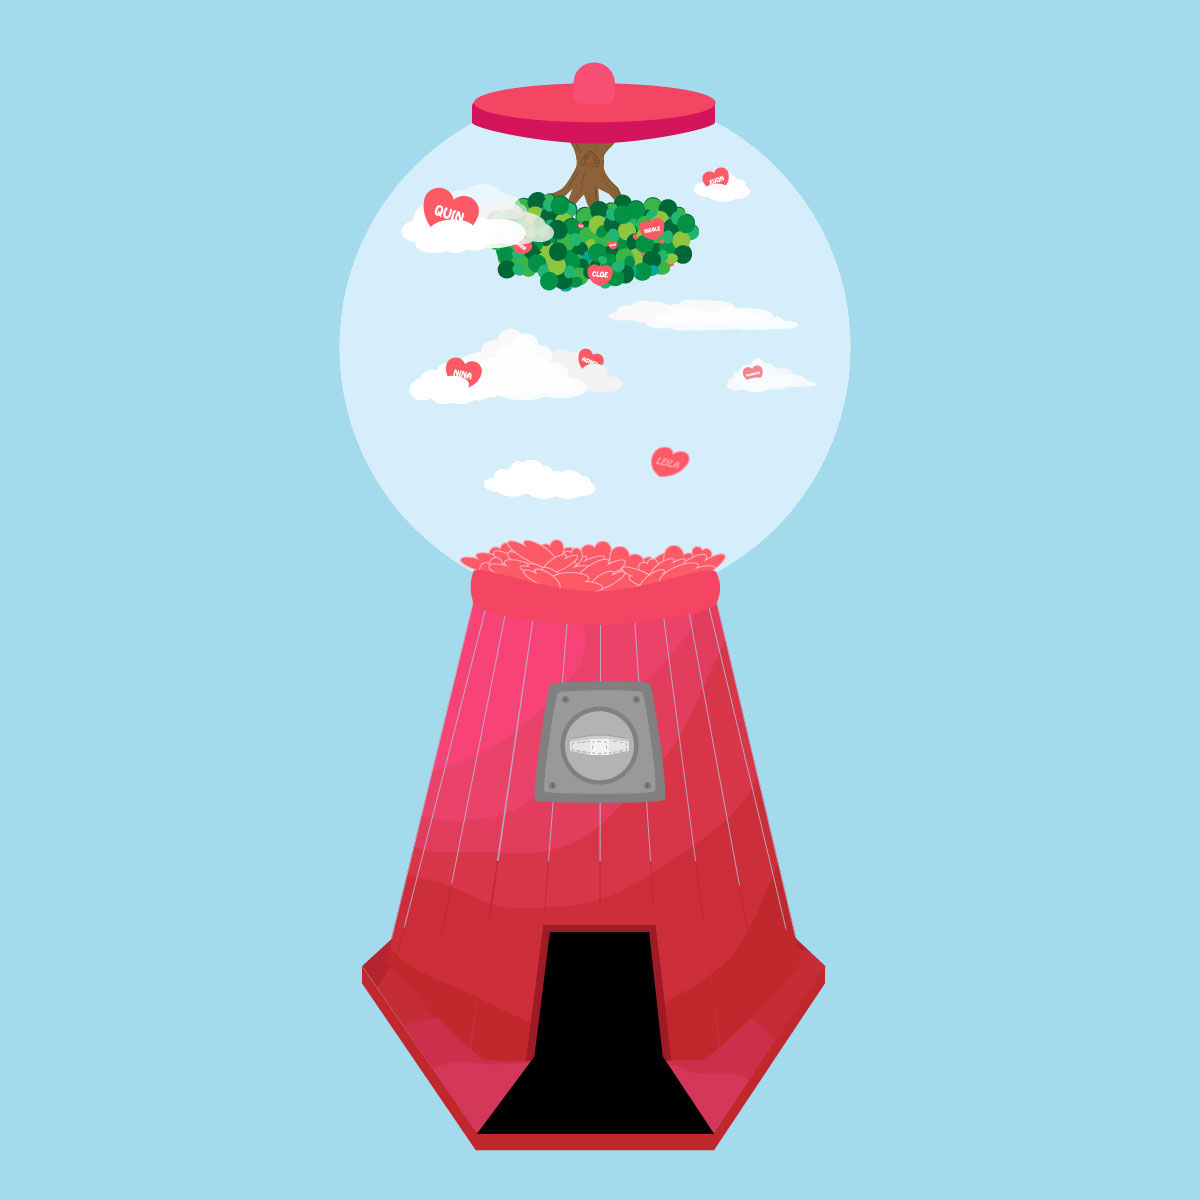 Gumball machine Choice clouds Love hearts game Tree  ILLUSTRATION  design